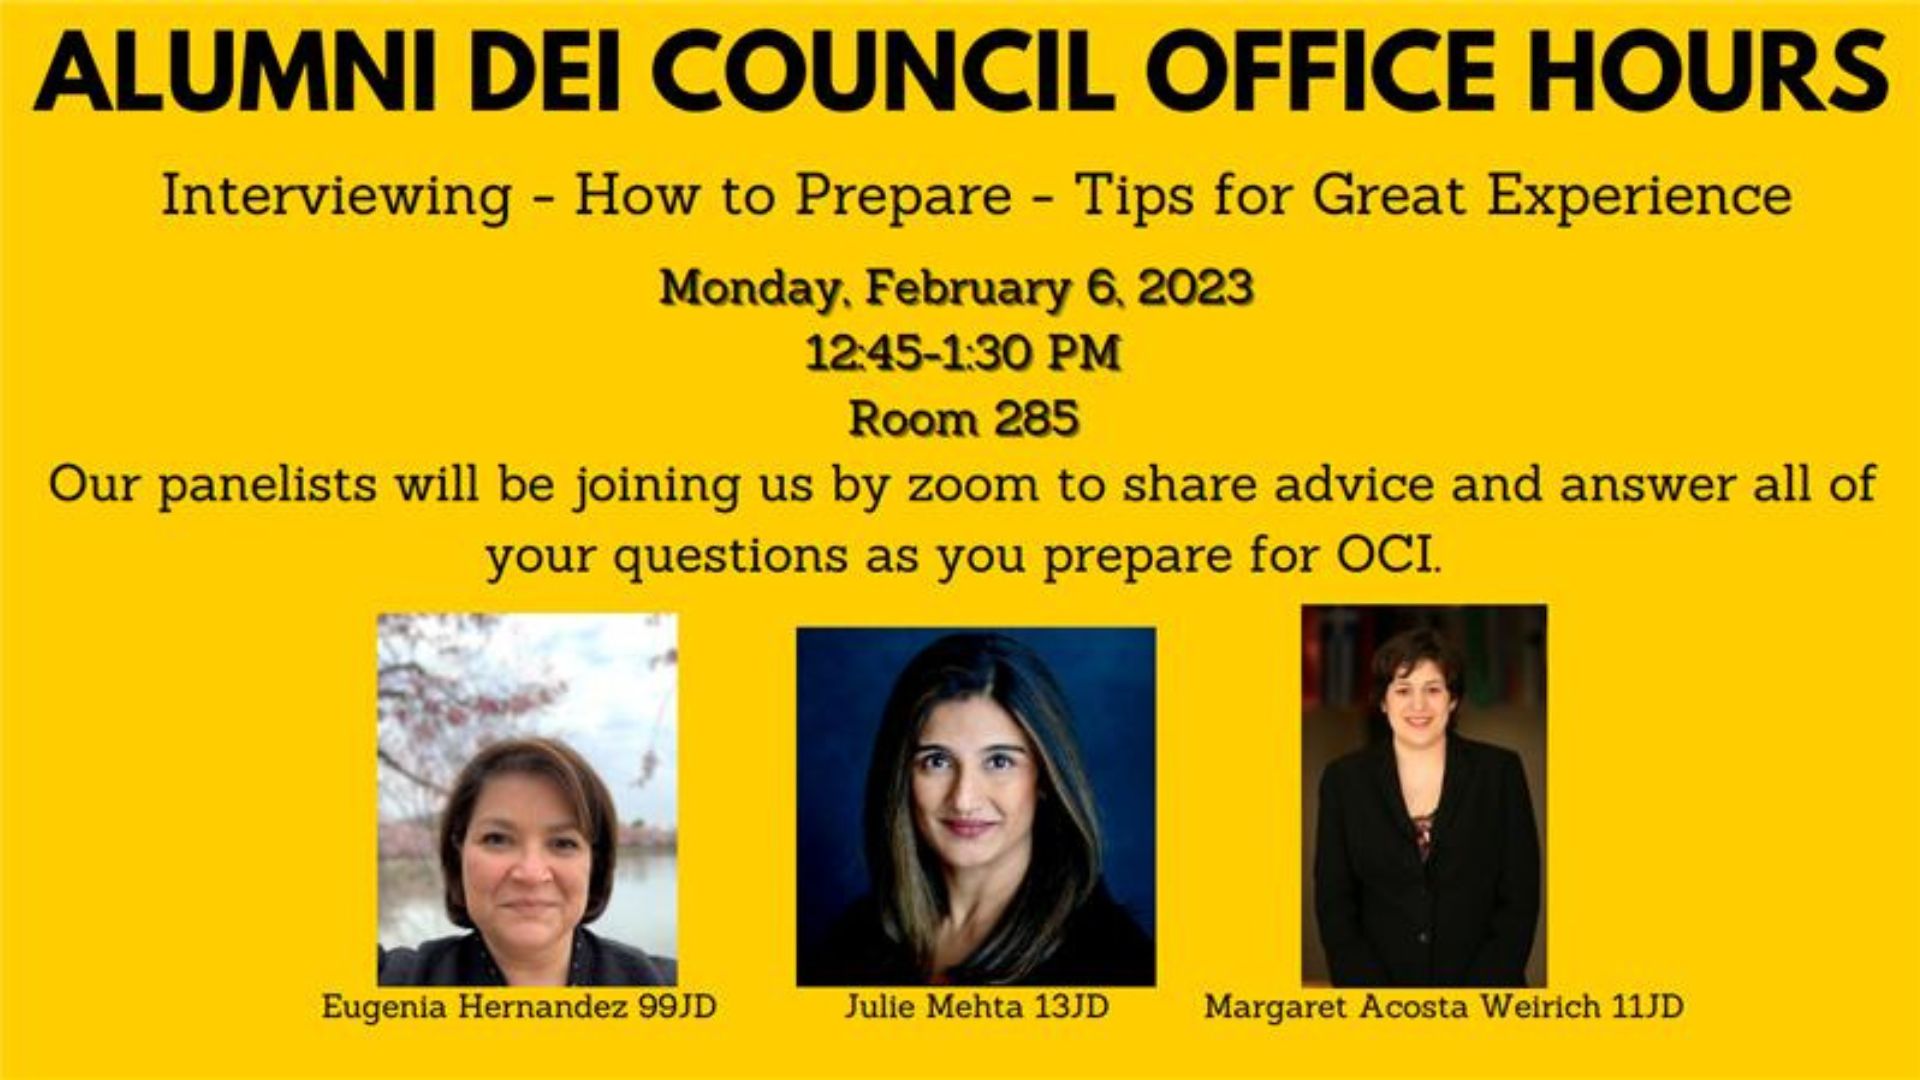 Alumni DEI Council Office Hours: Interviewing - How to Prepare - Tips for Great Experience. Monday, February 6, 2023. 12:45-1:30 PM. Room 285. Our panelists will be joining us by zoom to share advice and answer all of your questions as you prepare for OCI. 